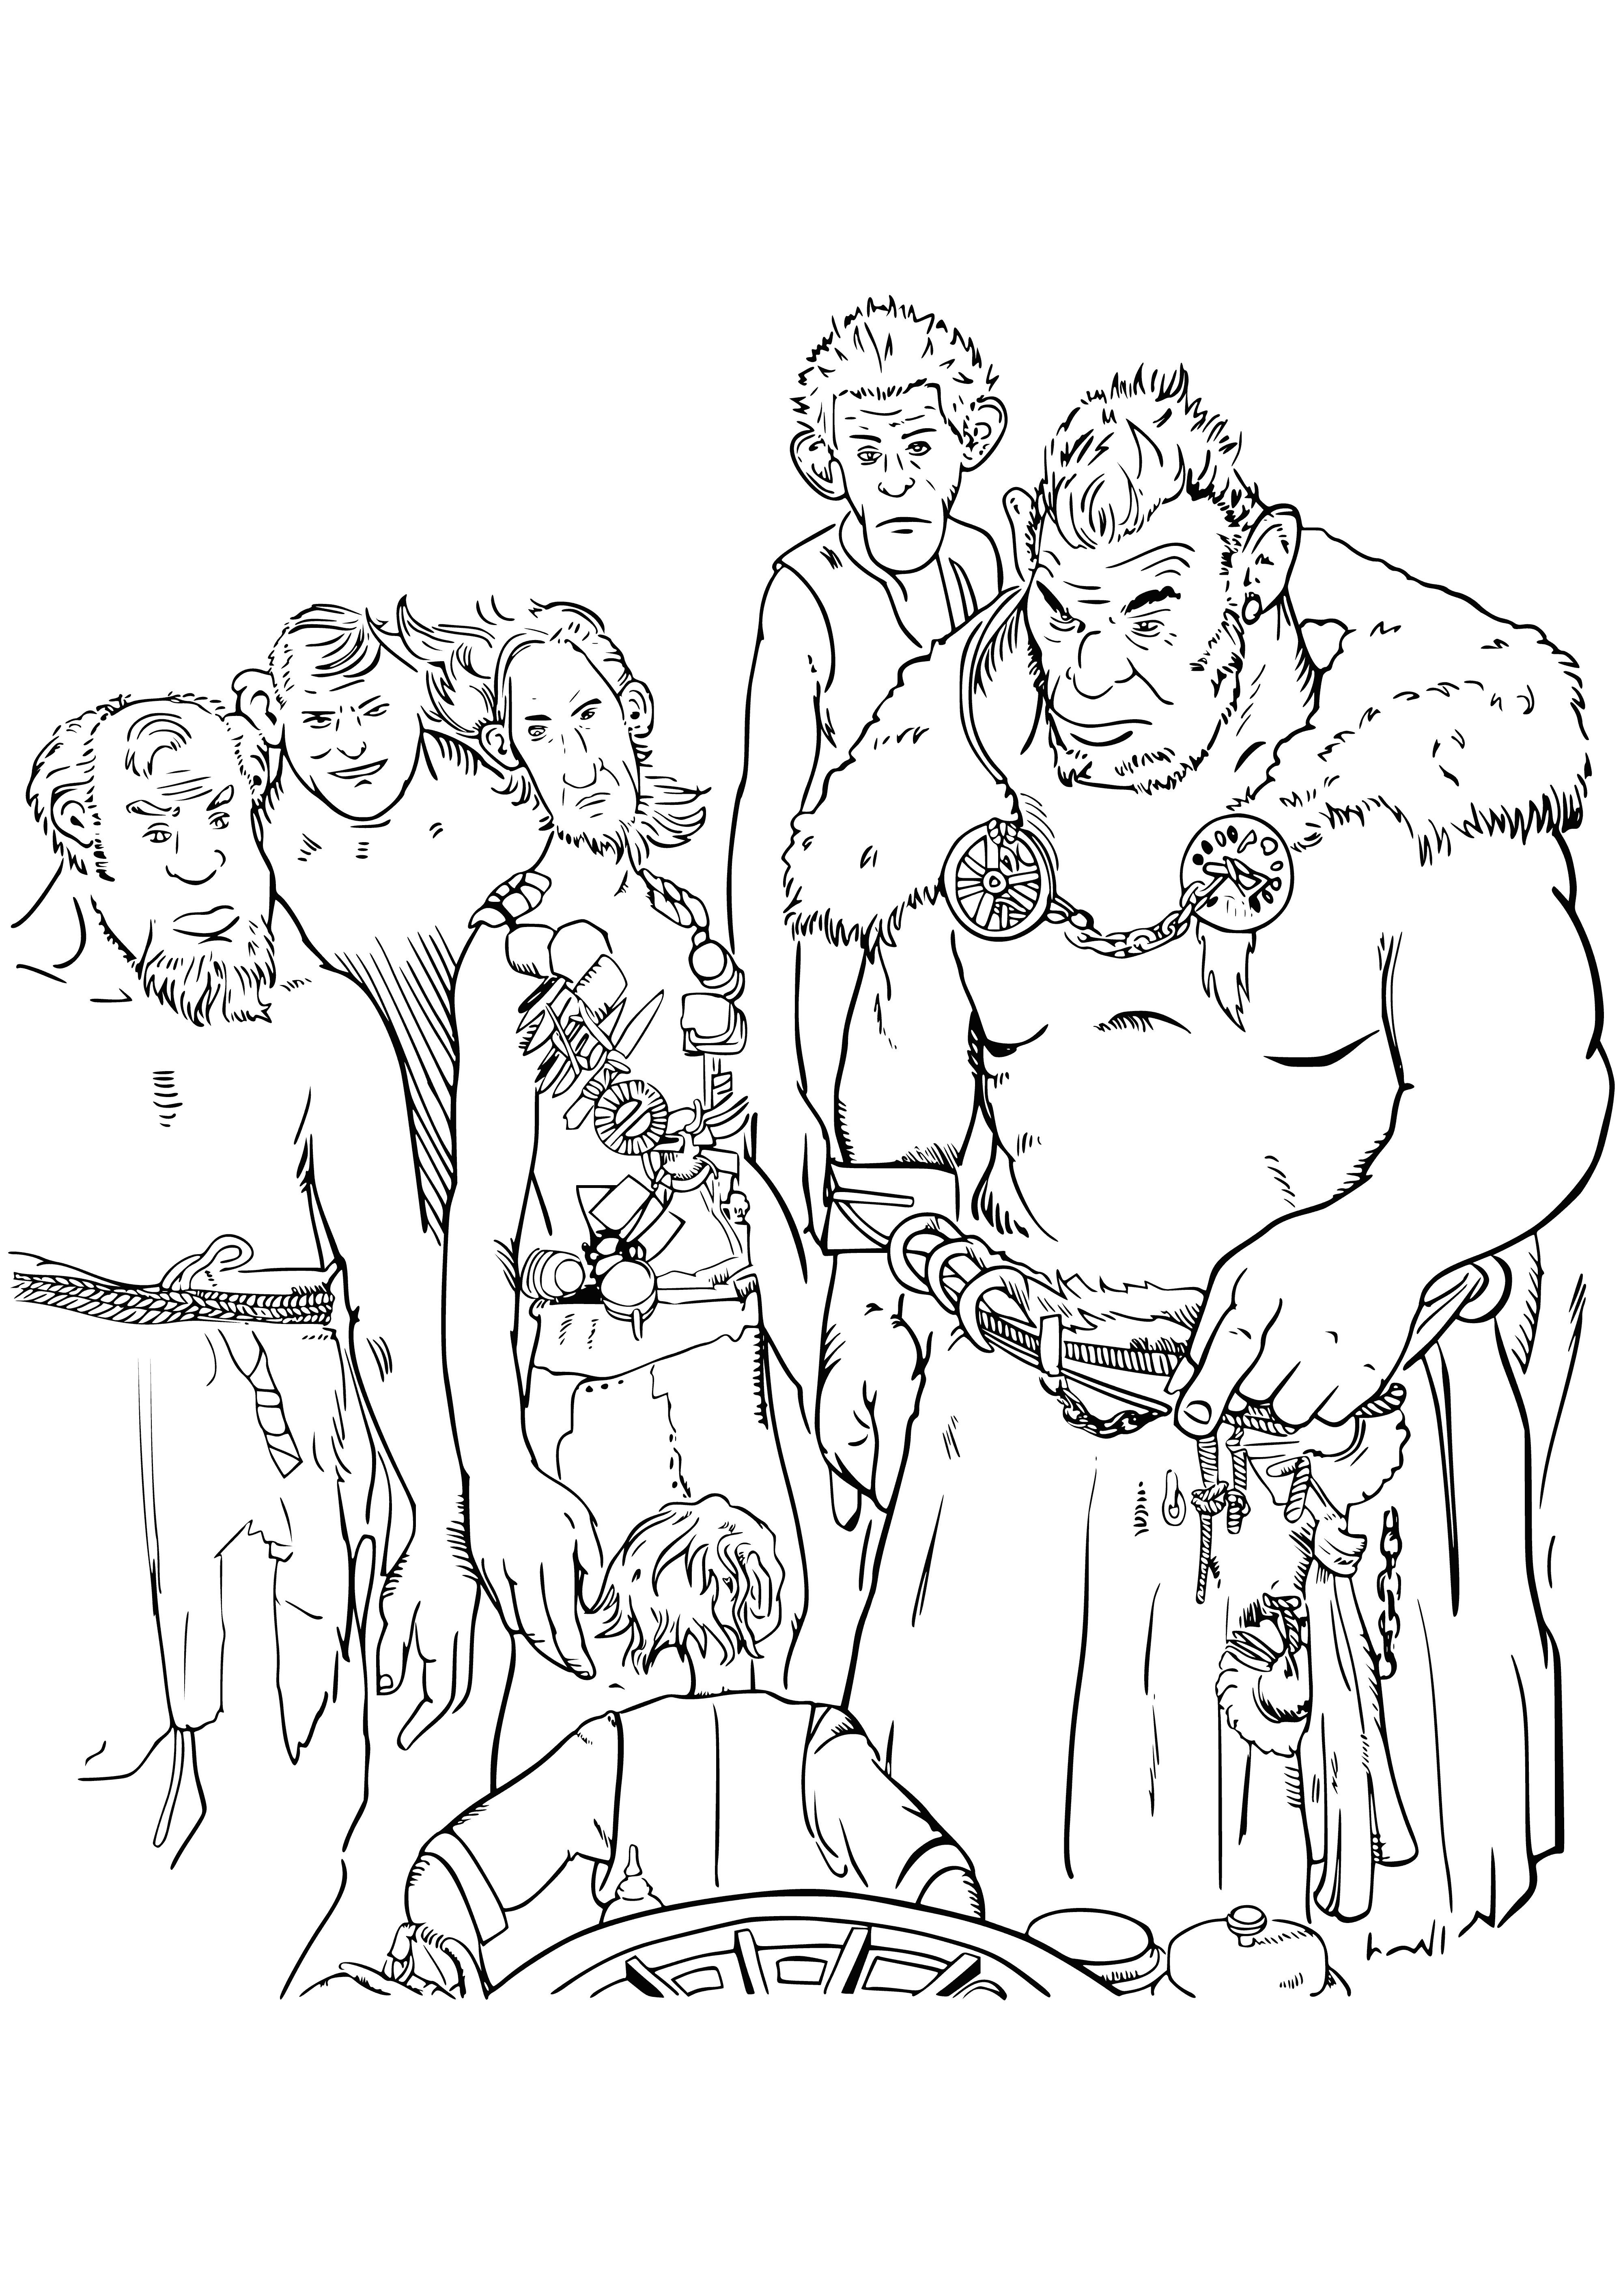 BDV and the evil cannibal giants coloring page